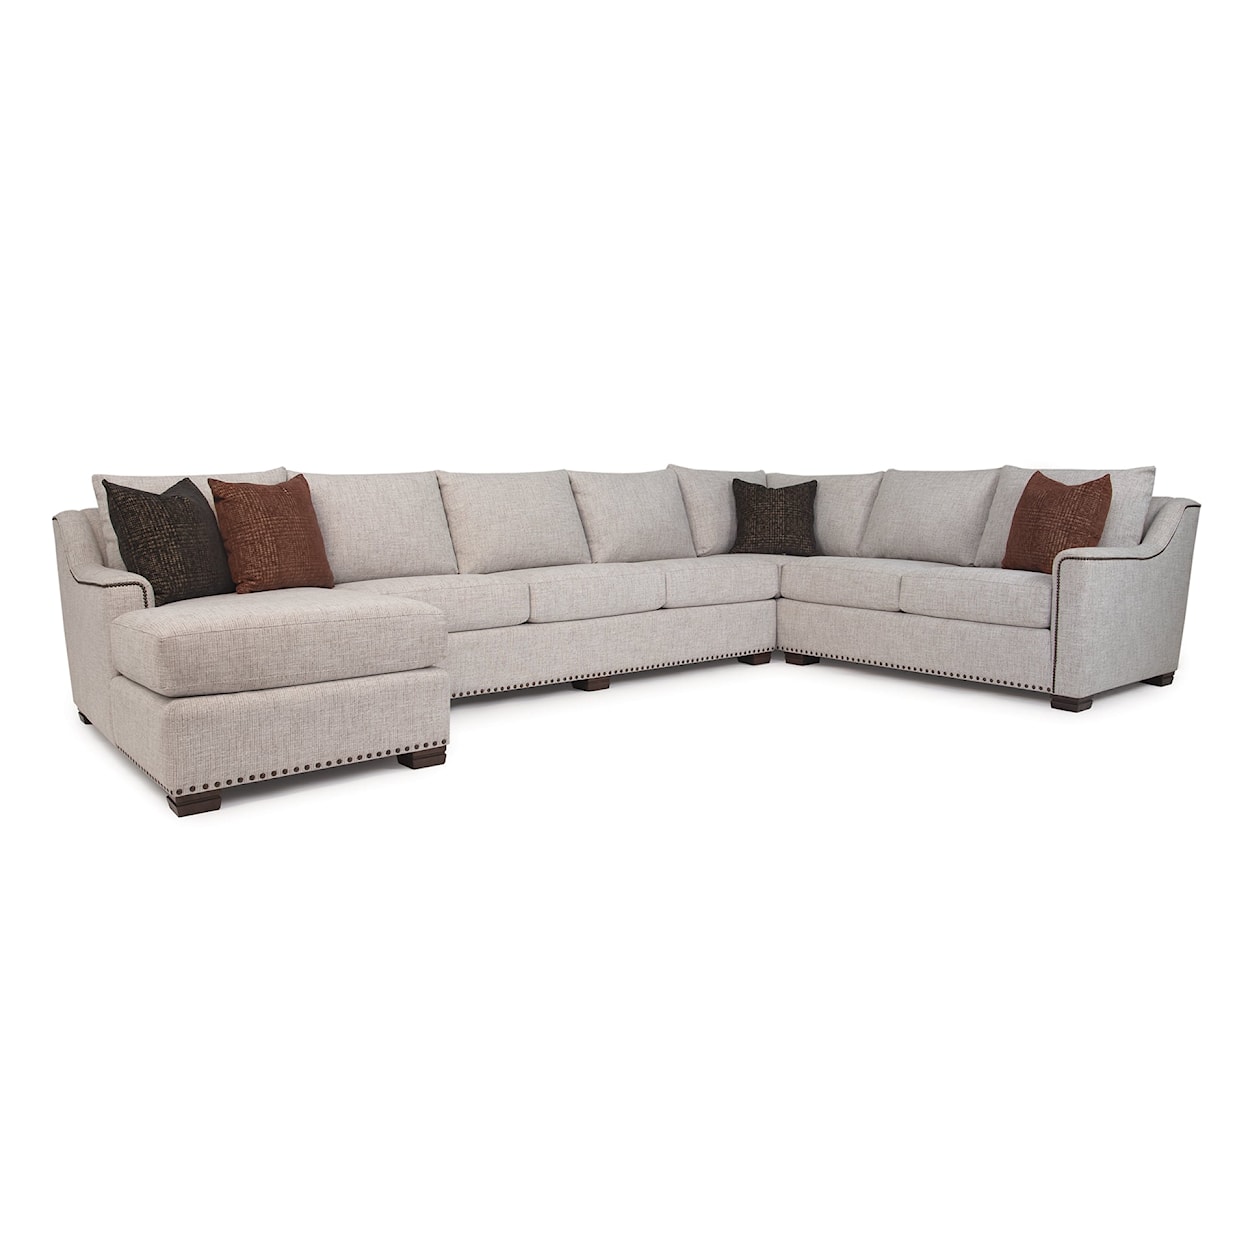 Smith Brothers 9000 Sectional Sofas